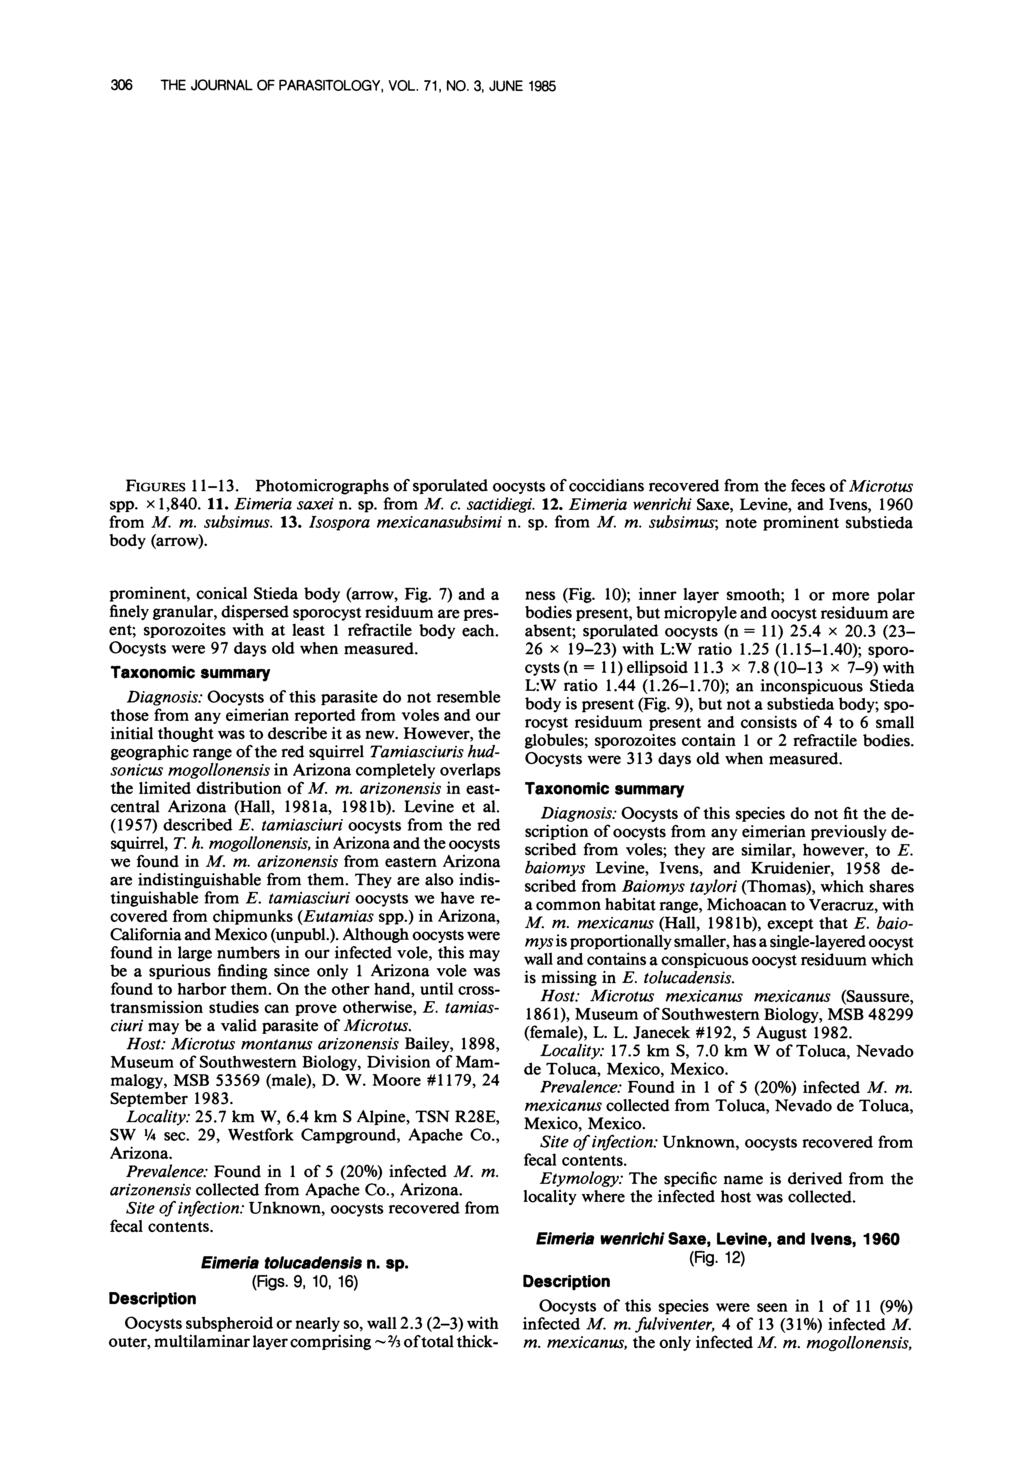 306 THE JOURNAL OF PARASITOLOGY, VOL. 71, NO. 3, JUNE 1985 ) ( ( FIGURES 11-13. Photomicrographs of sporulated oocysts of coccidians recovered from the feces of Microtus spp. x 1,840. 11. Eimeria saxei n.